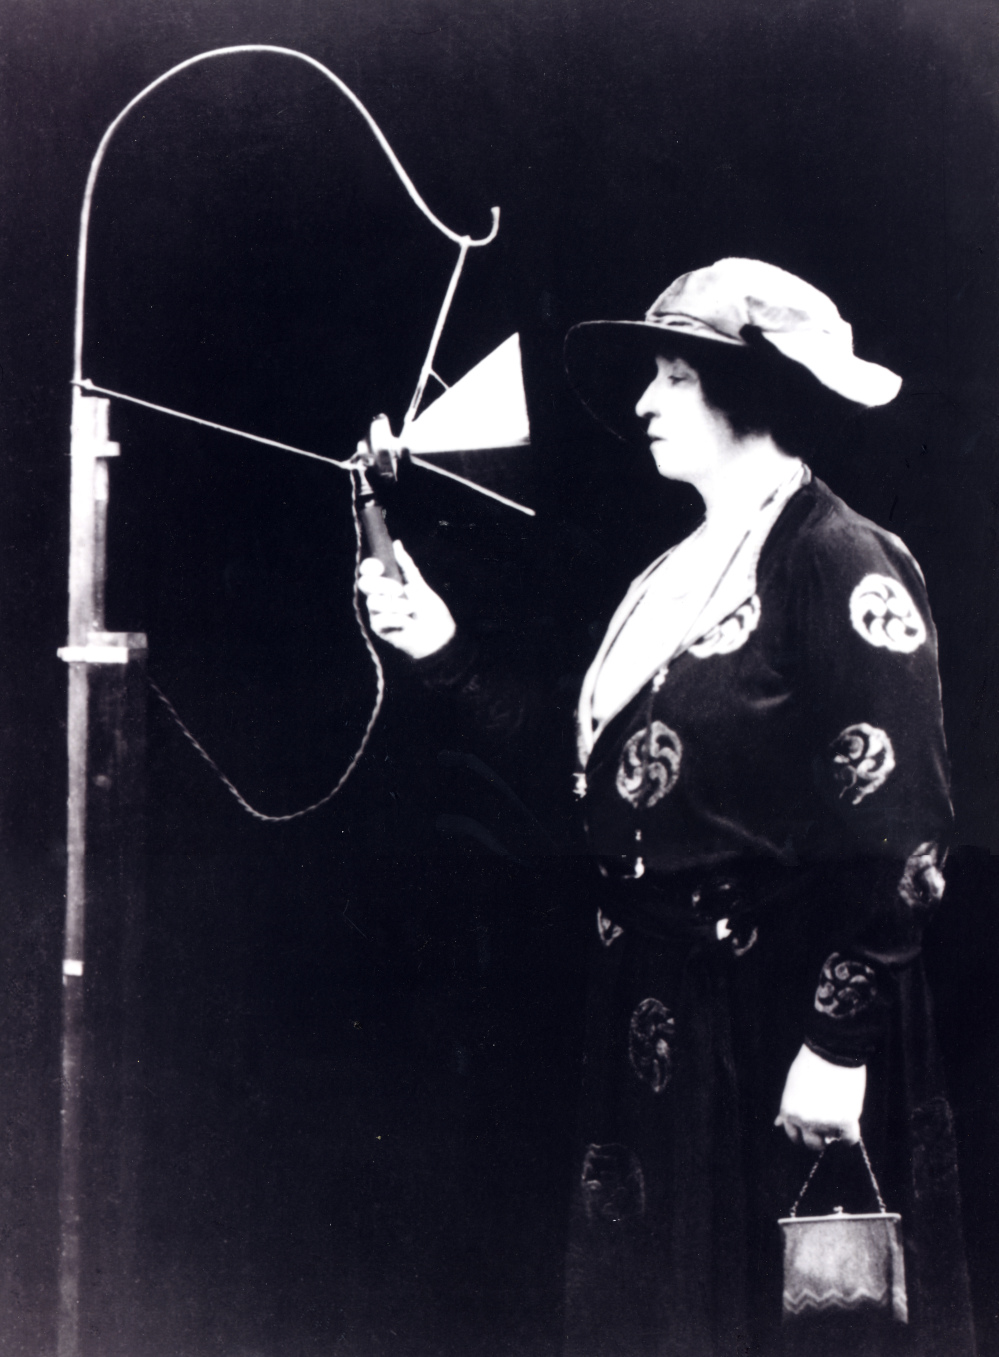 preview image for Reproduction Photograph of Dame Nellie Melba at an Early Marconi Radio Broadcast, English, 20th Century (Taken 1920)